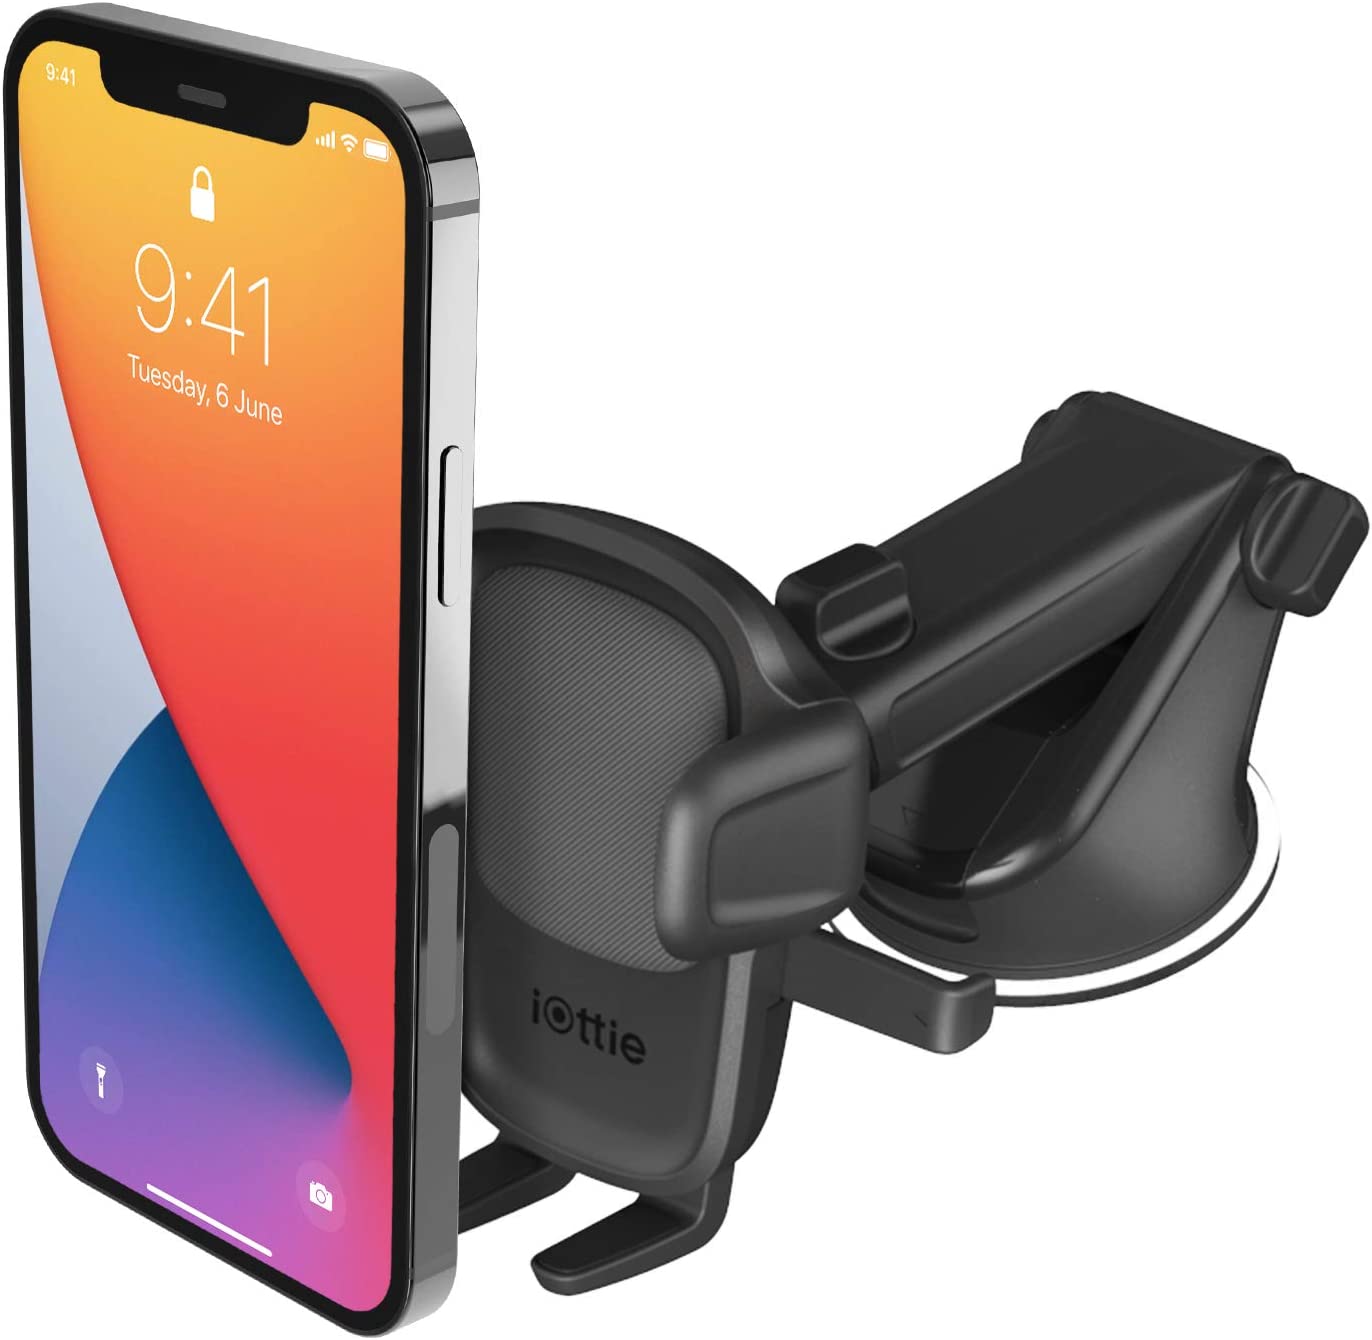 5s 8 Plus Samsung Glaxy and Note Series and More Cell Phones 6s 8/7 Plus Dashboard Clip Car Phone Holder Mount with 360-Degree-Rotation for iPhone Xs Max/Xr/Xs/X 7s